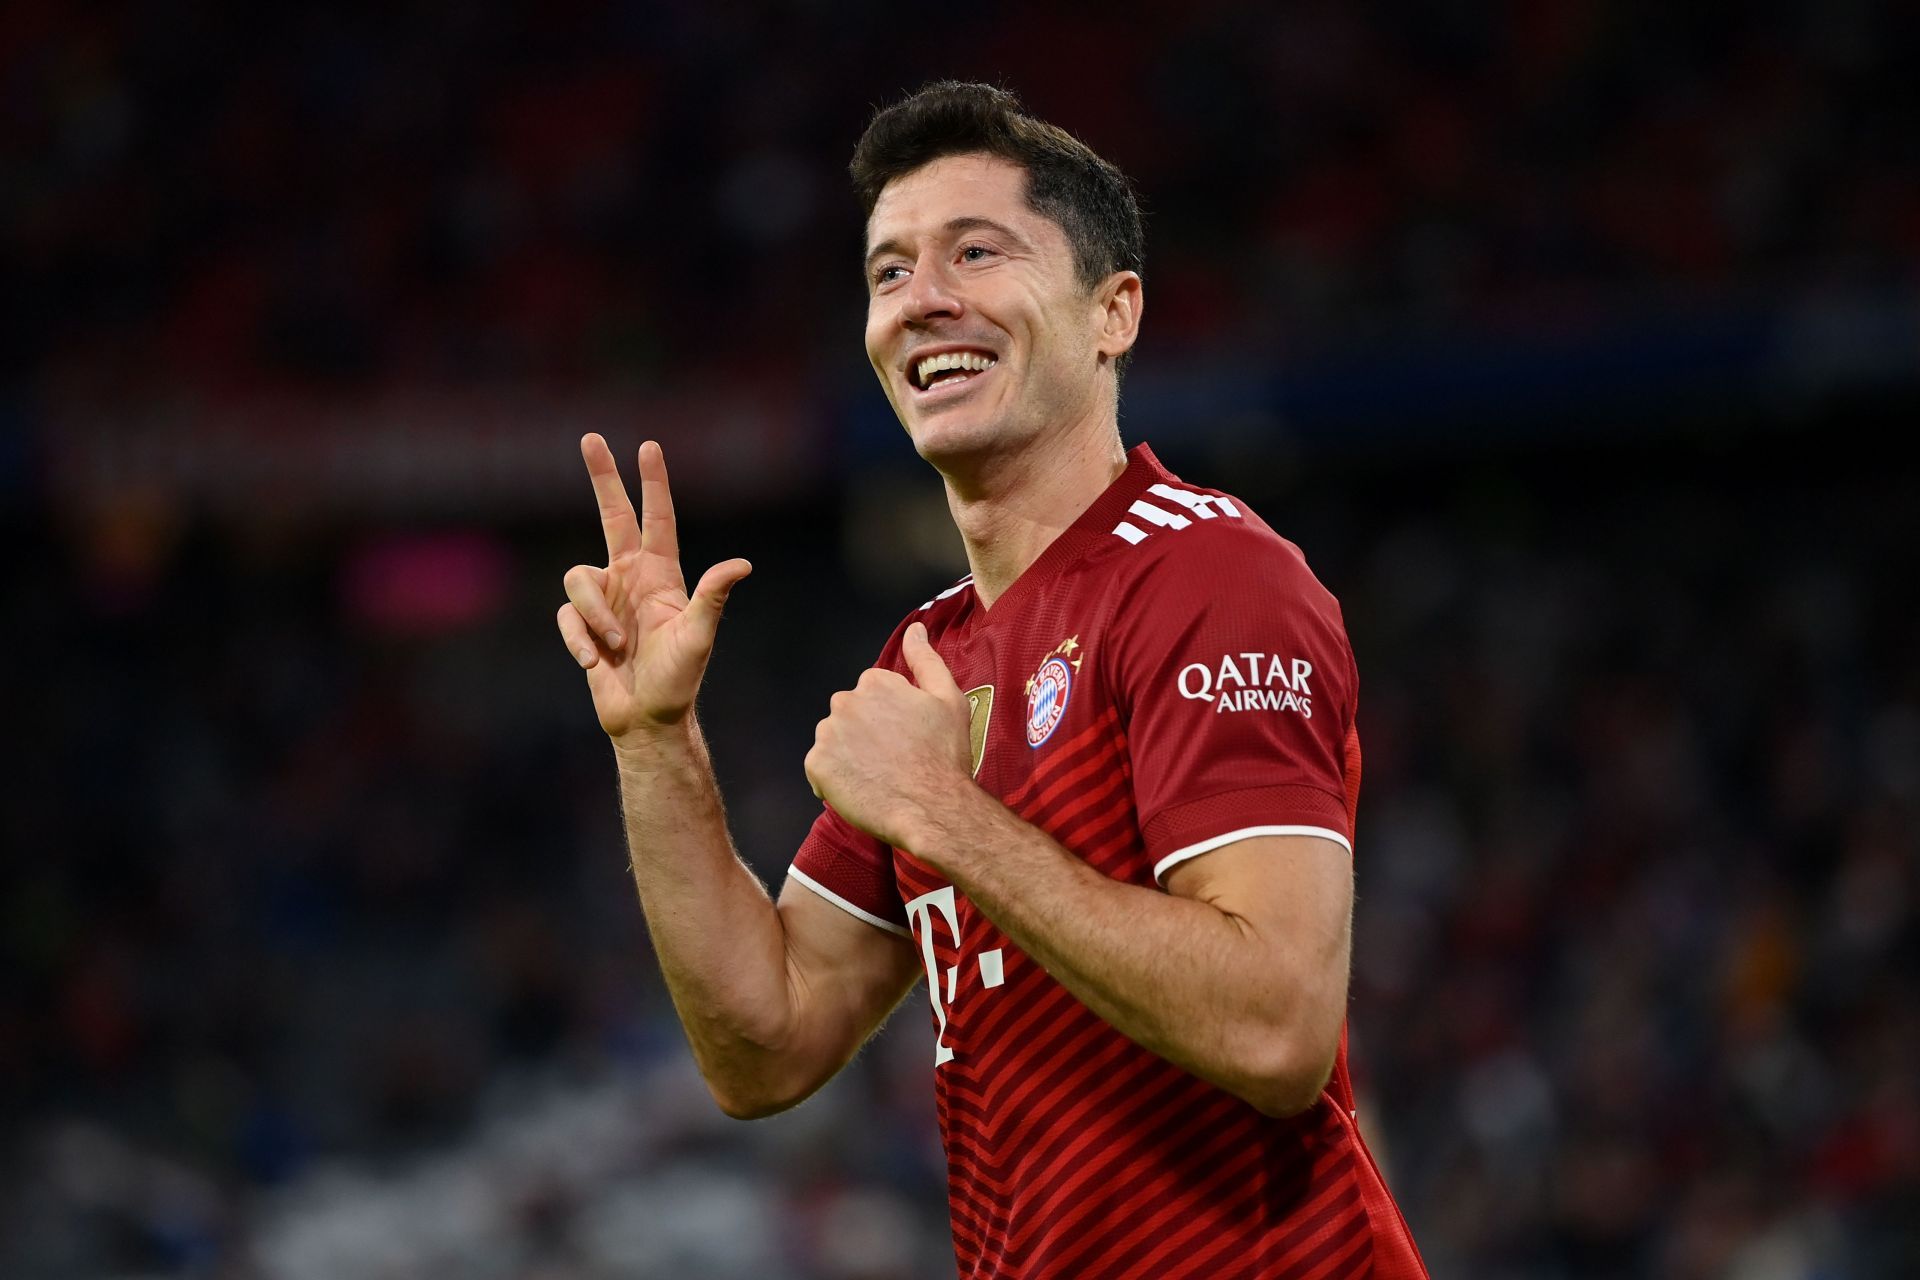 Robert Lewandowski has made it a habit to score in almost every game in recent years.